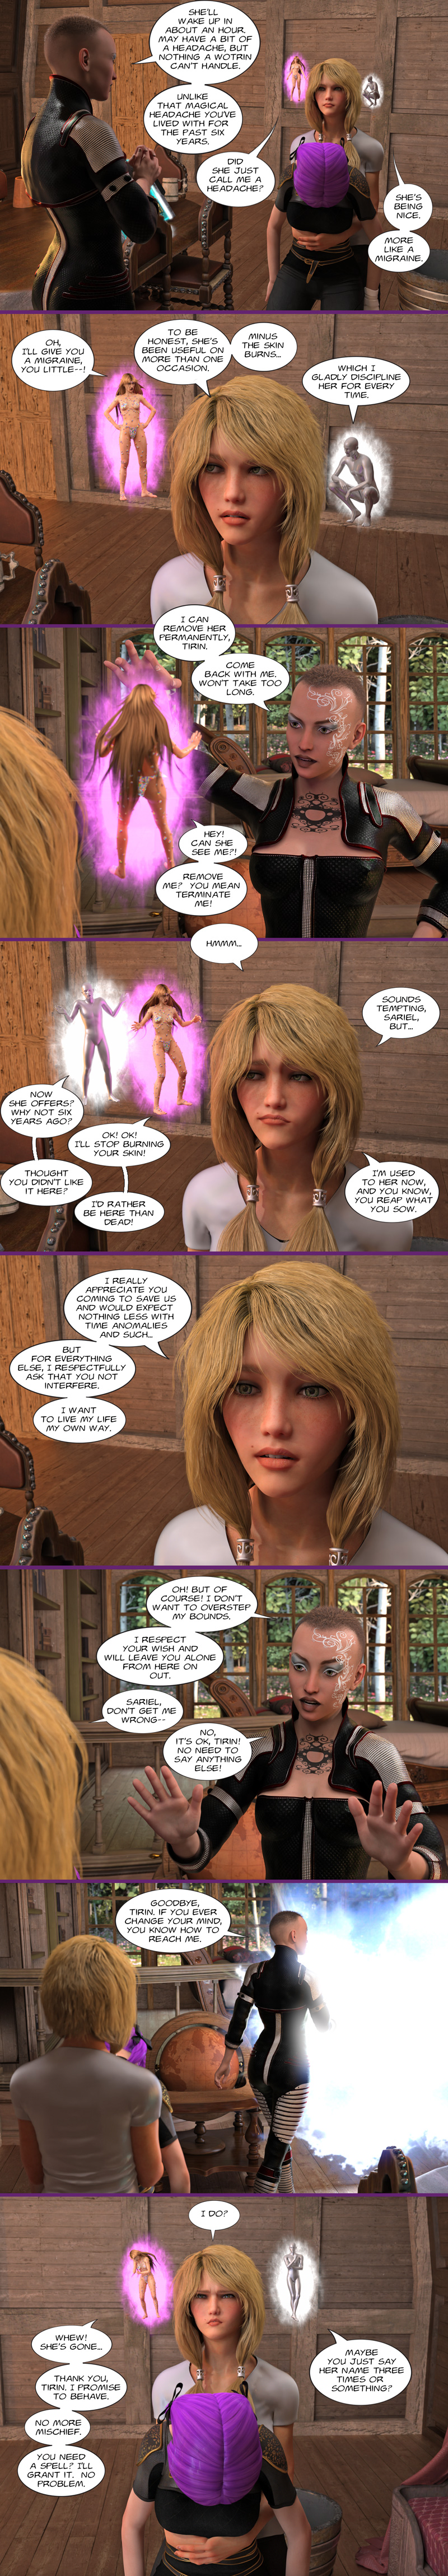 Chapter 18, page 18 – let me live my life, Sariel